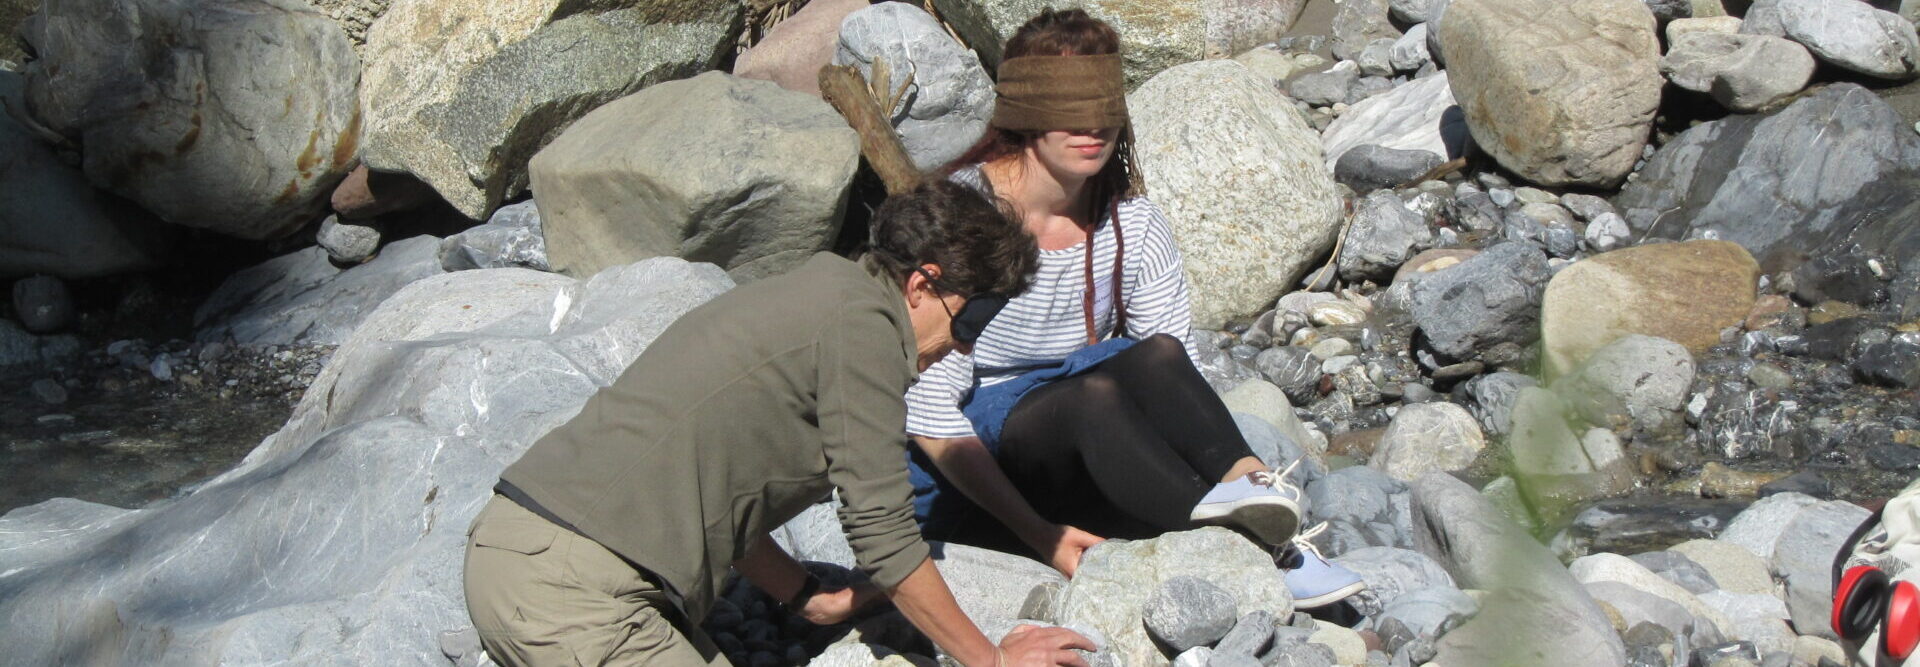 Self-experience in the workshop "Land-Art%in the international congress on "Deafblindness & Self-Expression" in the alpine village Bergün. The two participants explore stones in a stream bed while crouching and sitting blindfolded.